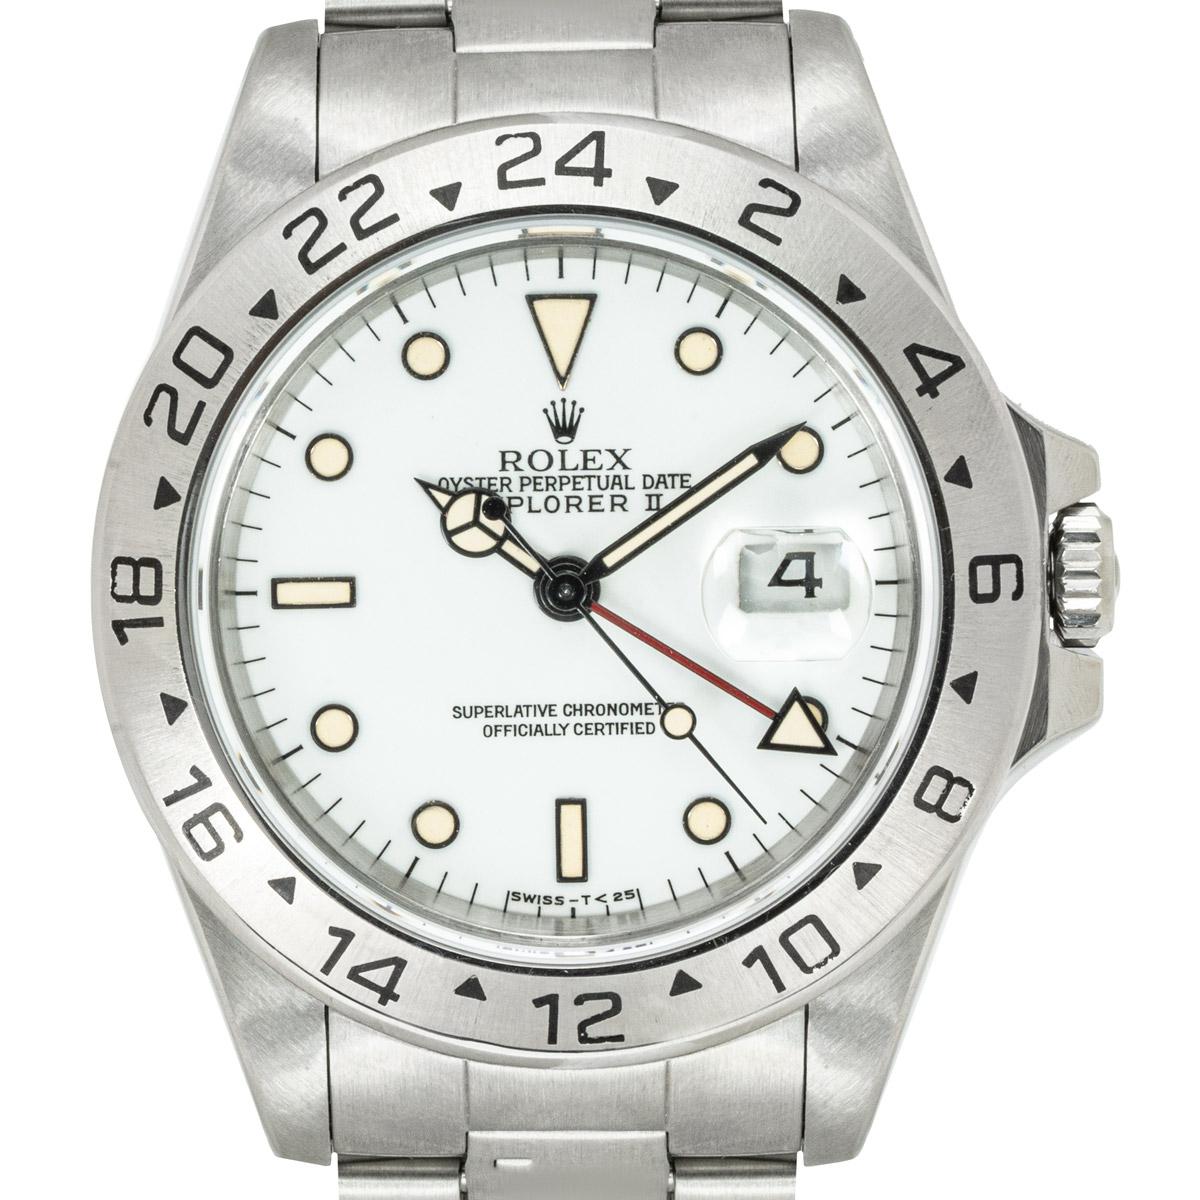 A 40mm Explorer II in stainless steel by Rolex. Featuring a white dial with distinctive cream-applied hour markers as well as hands, a date aperture, a red 24 hour hand and a fixed bezel with a 24 hour display.

Equipped with an Oyster bracelet and